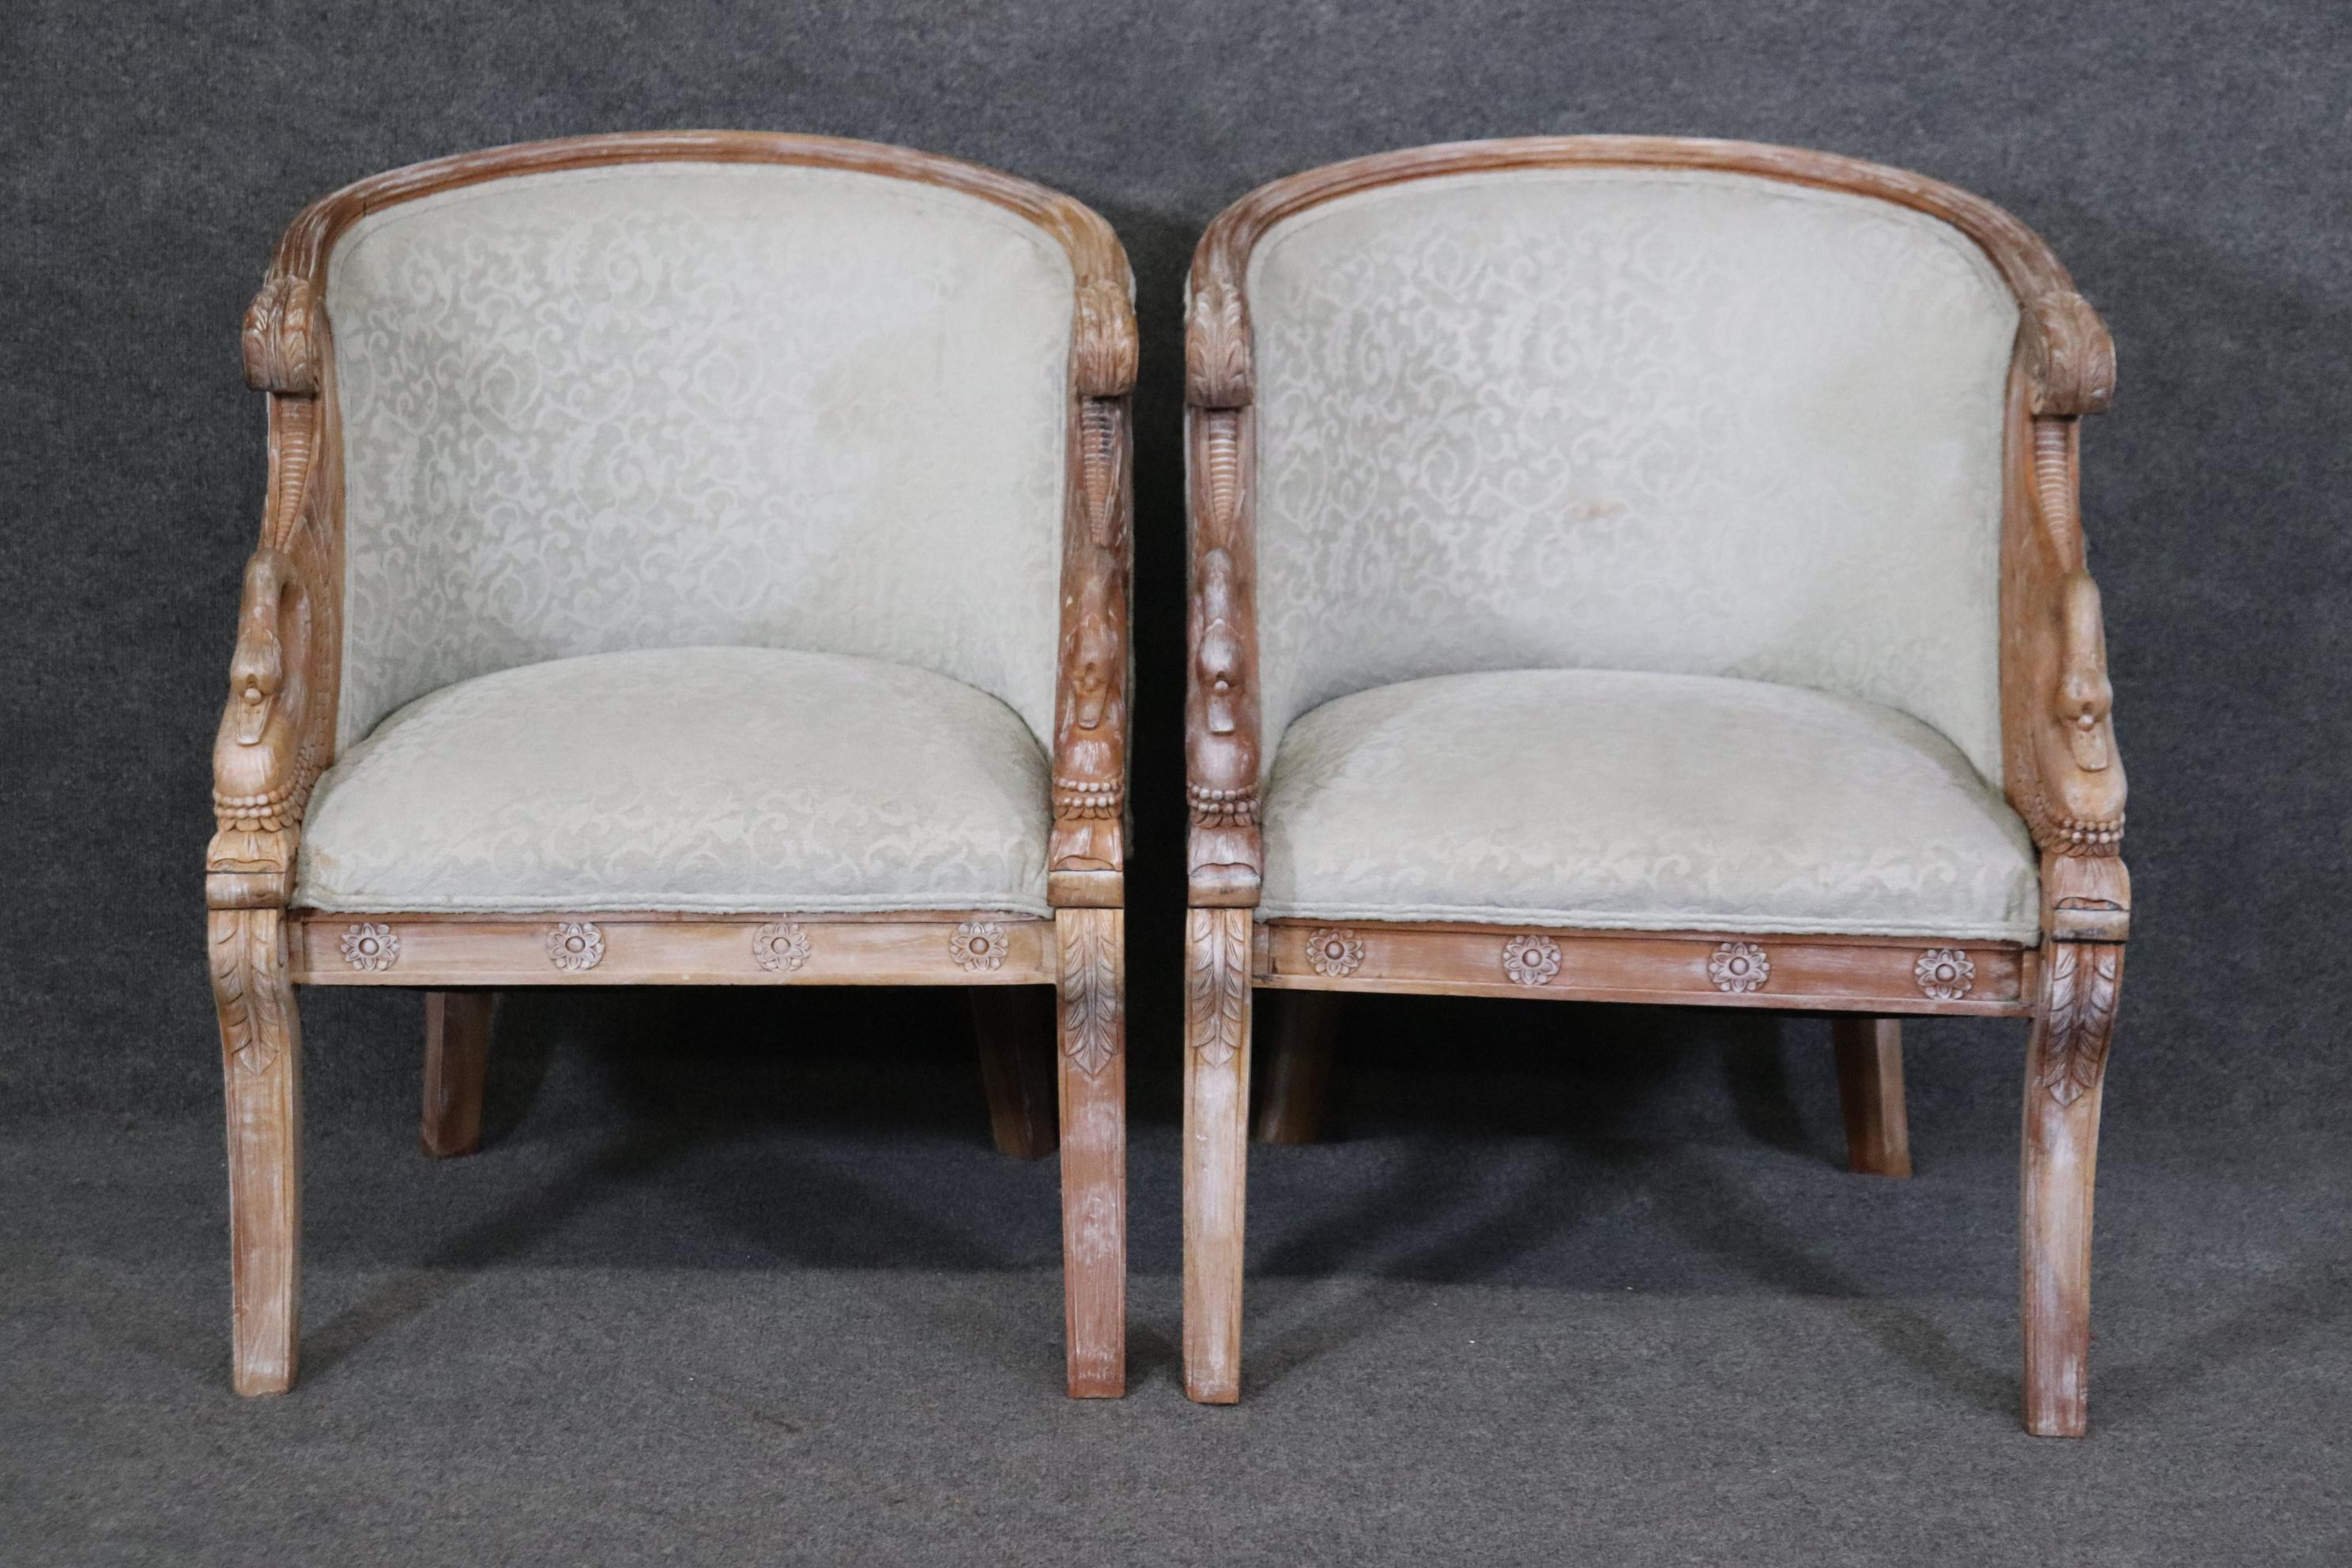 Regency Revival Nice Pair of White Washed Walnut Carved Swan Tub Style Bergere Chairs 